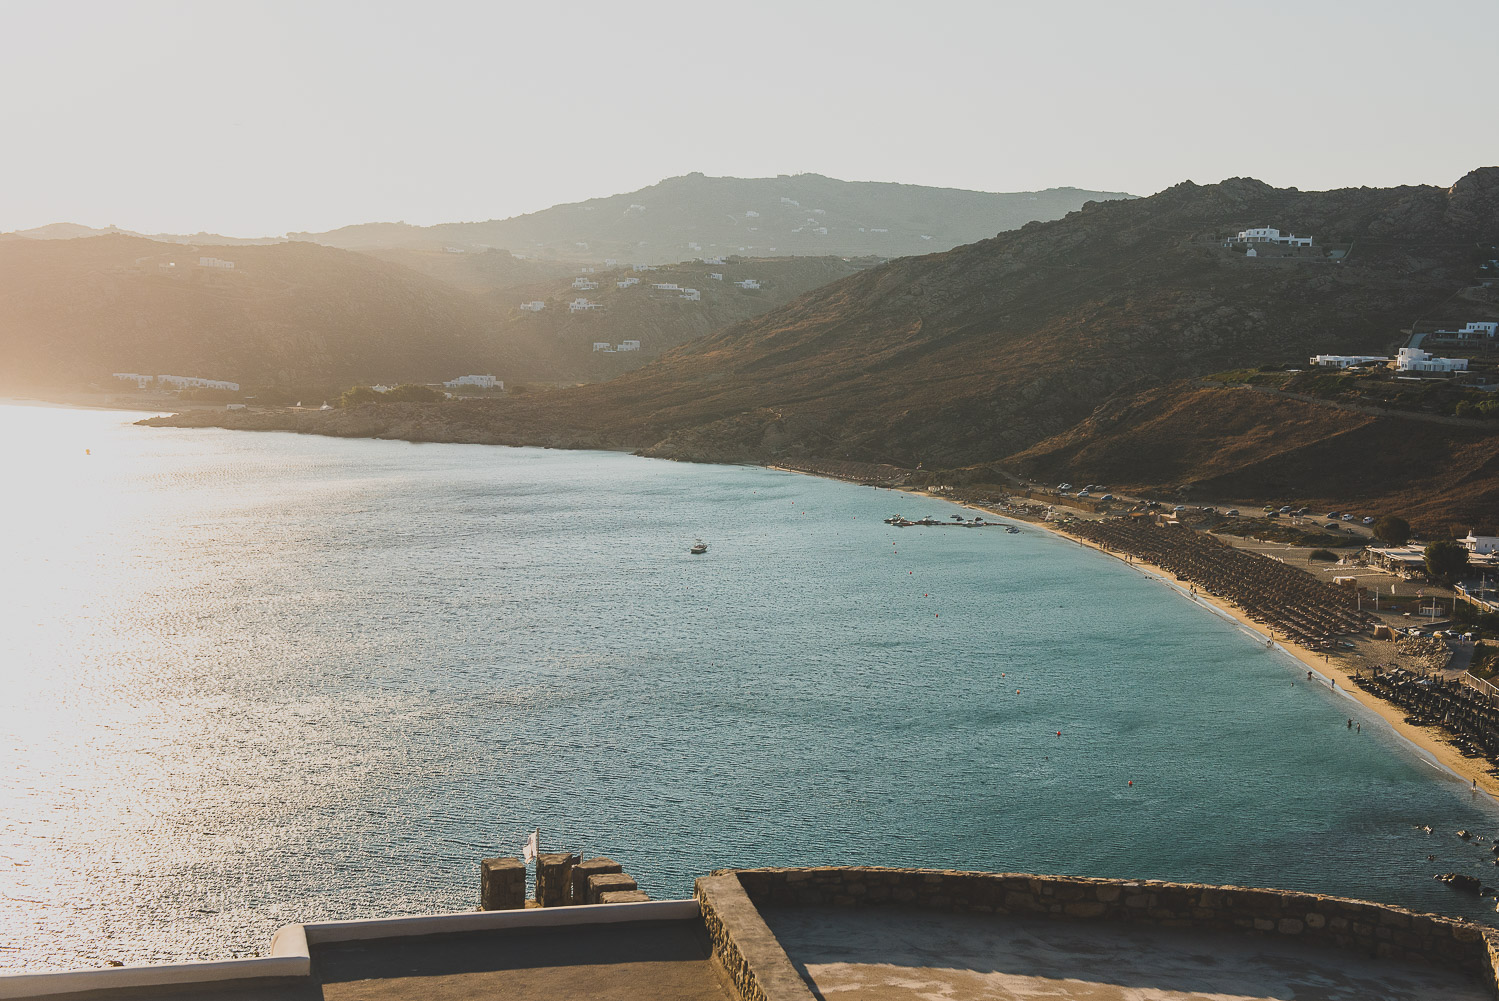 Wedding photographer Mykonos: beautiful views of the beach and hills for this Mykonos wedding.